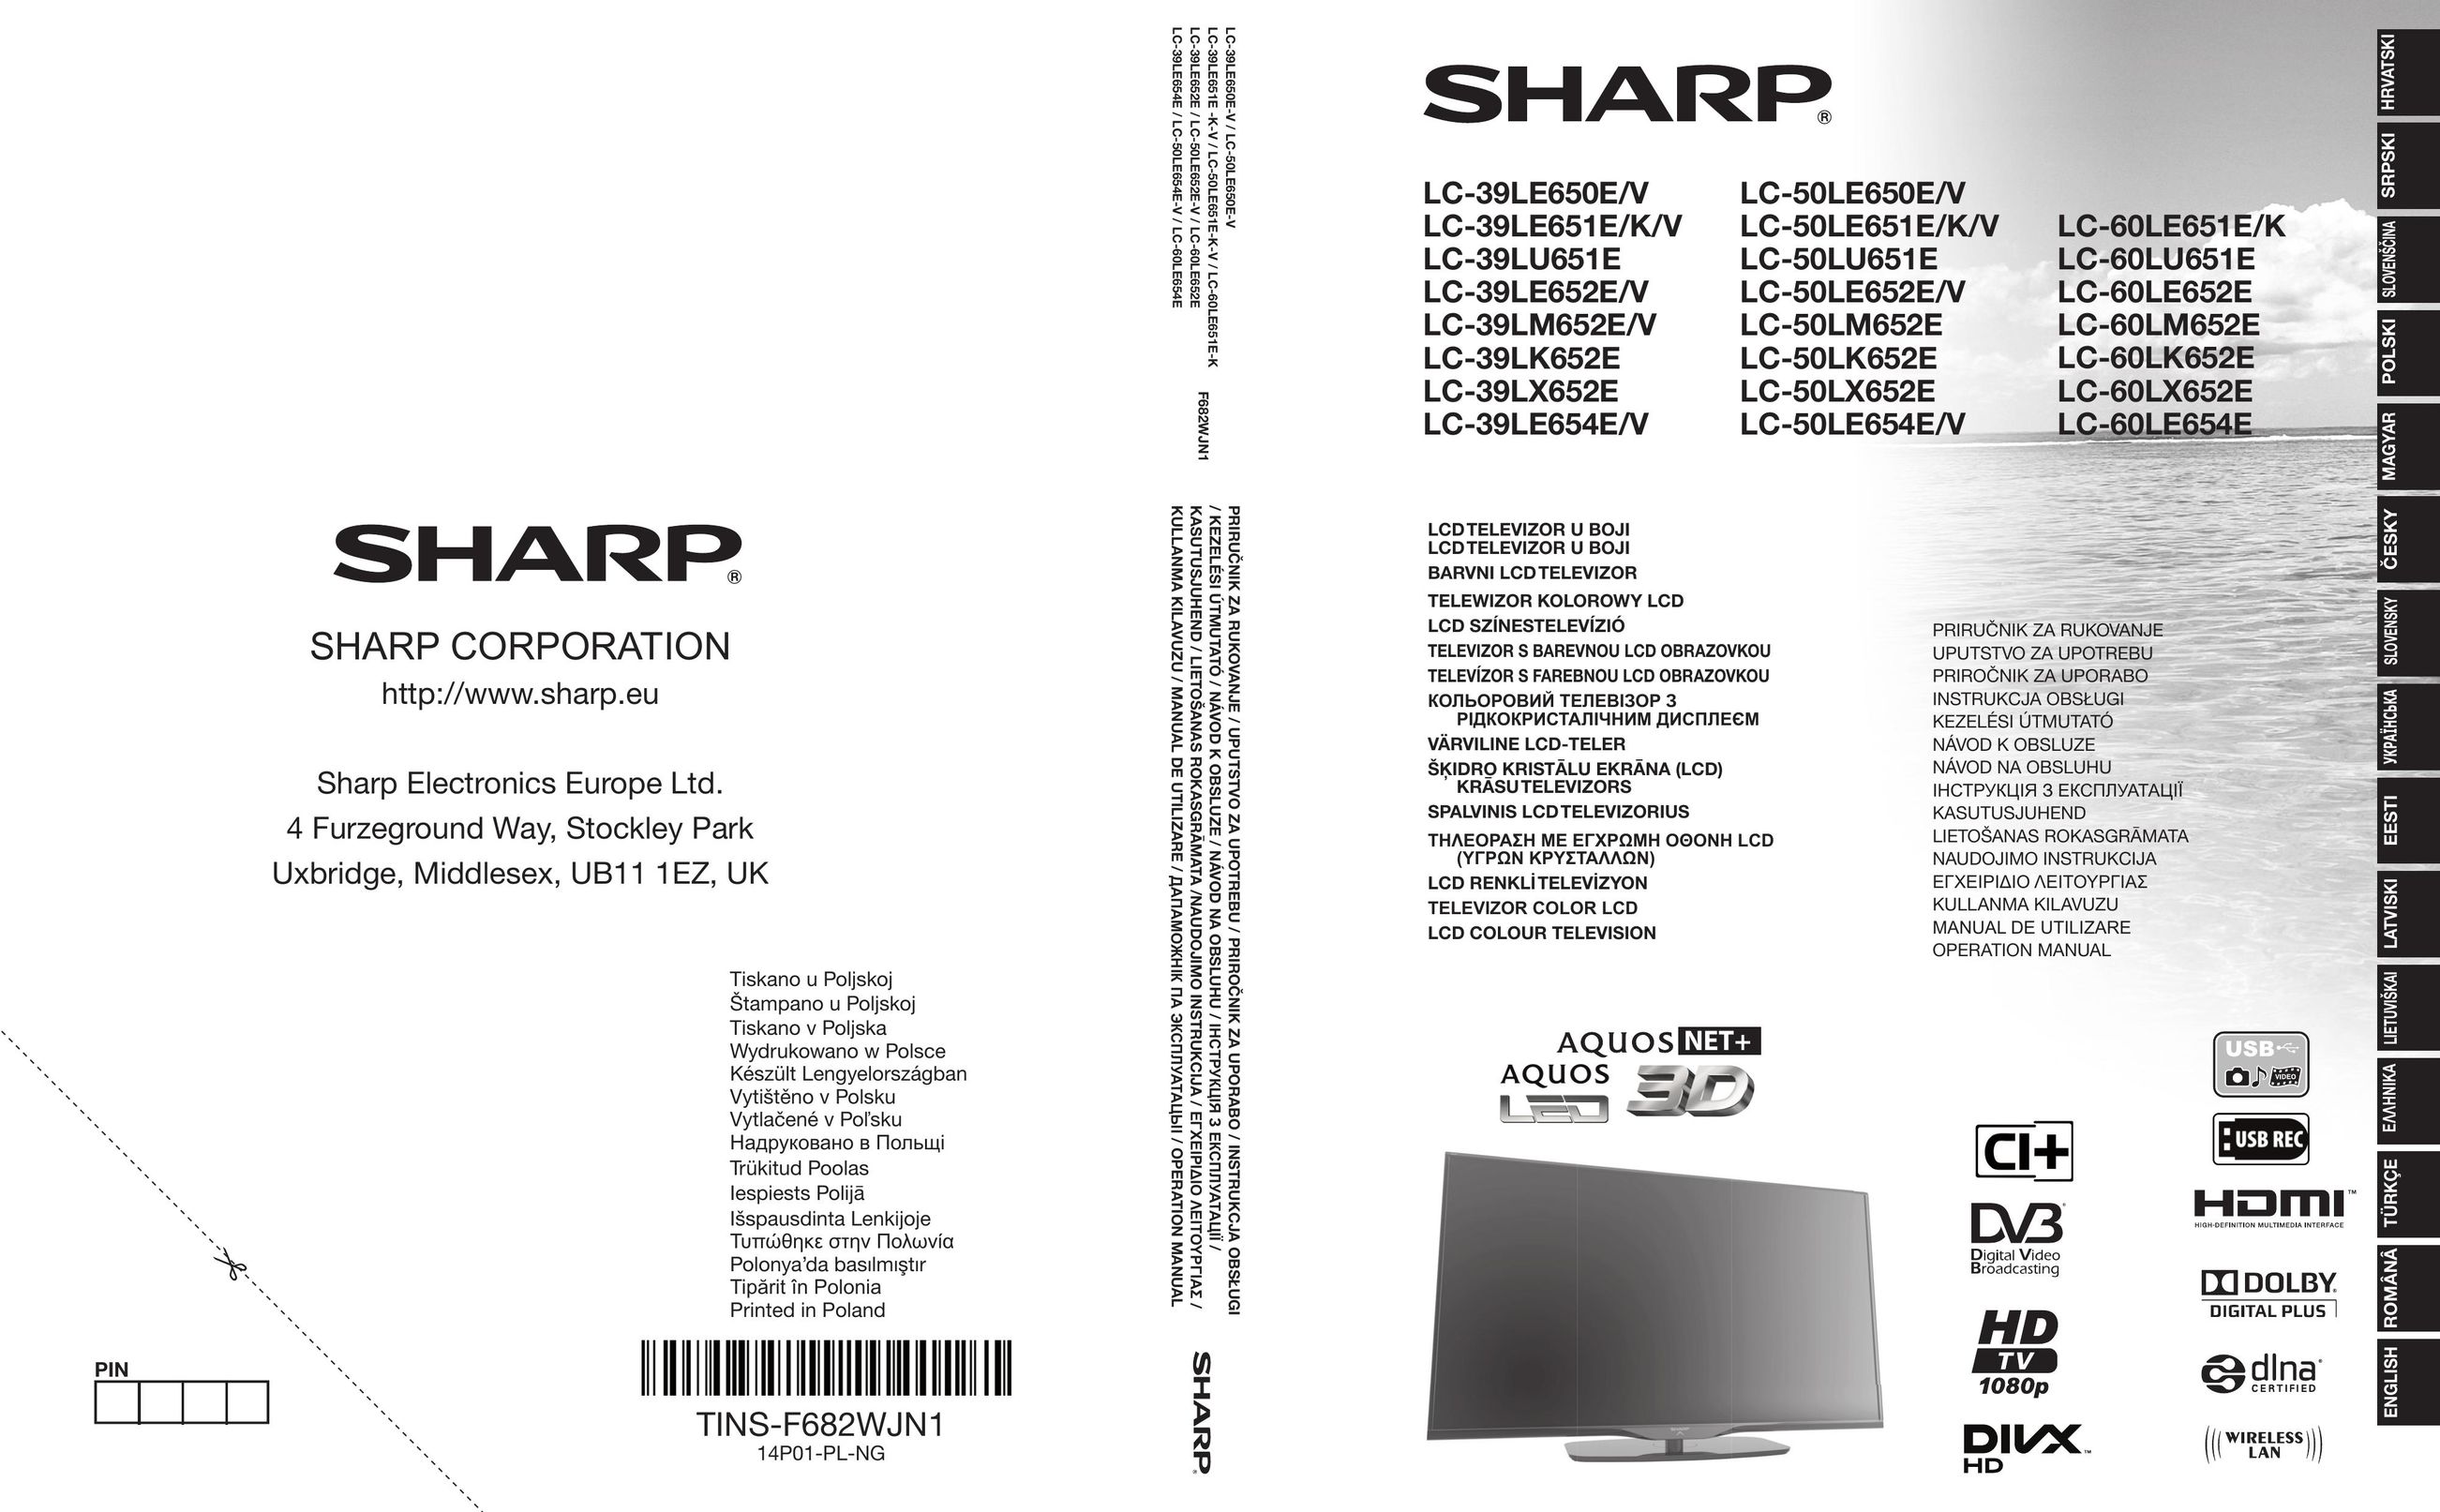 Sharp LC-60LM652E Car Video System User Manual